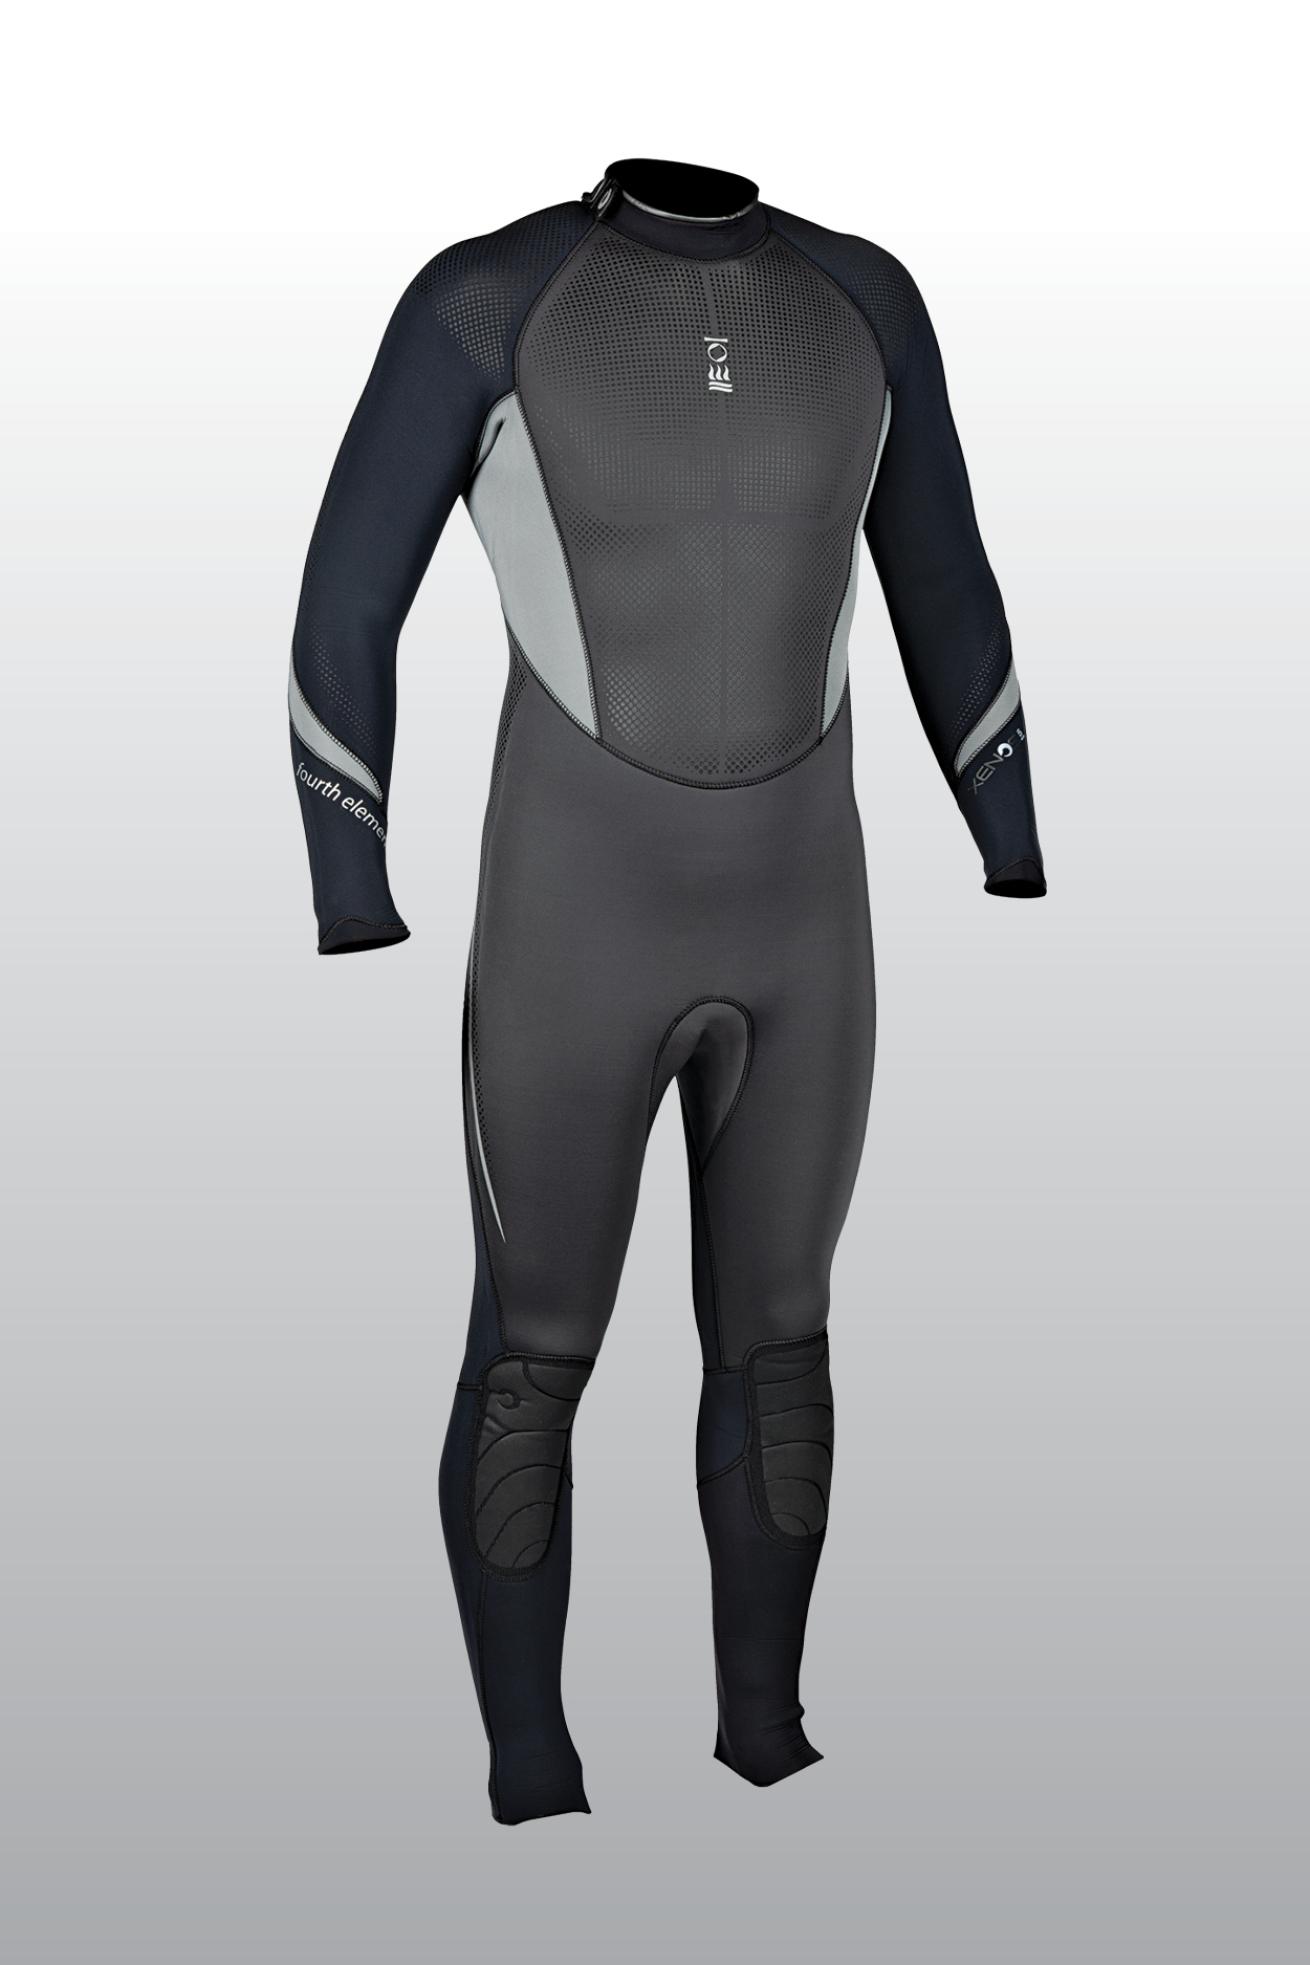 The Best 5 mm Scuba Wetsuits Reviewed by ScubaLab | Scuba Diving